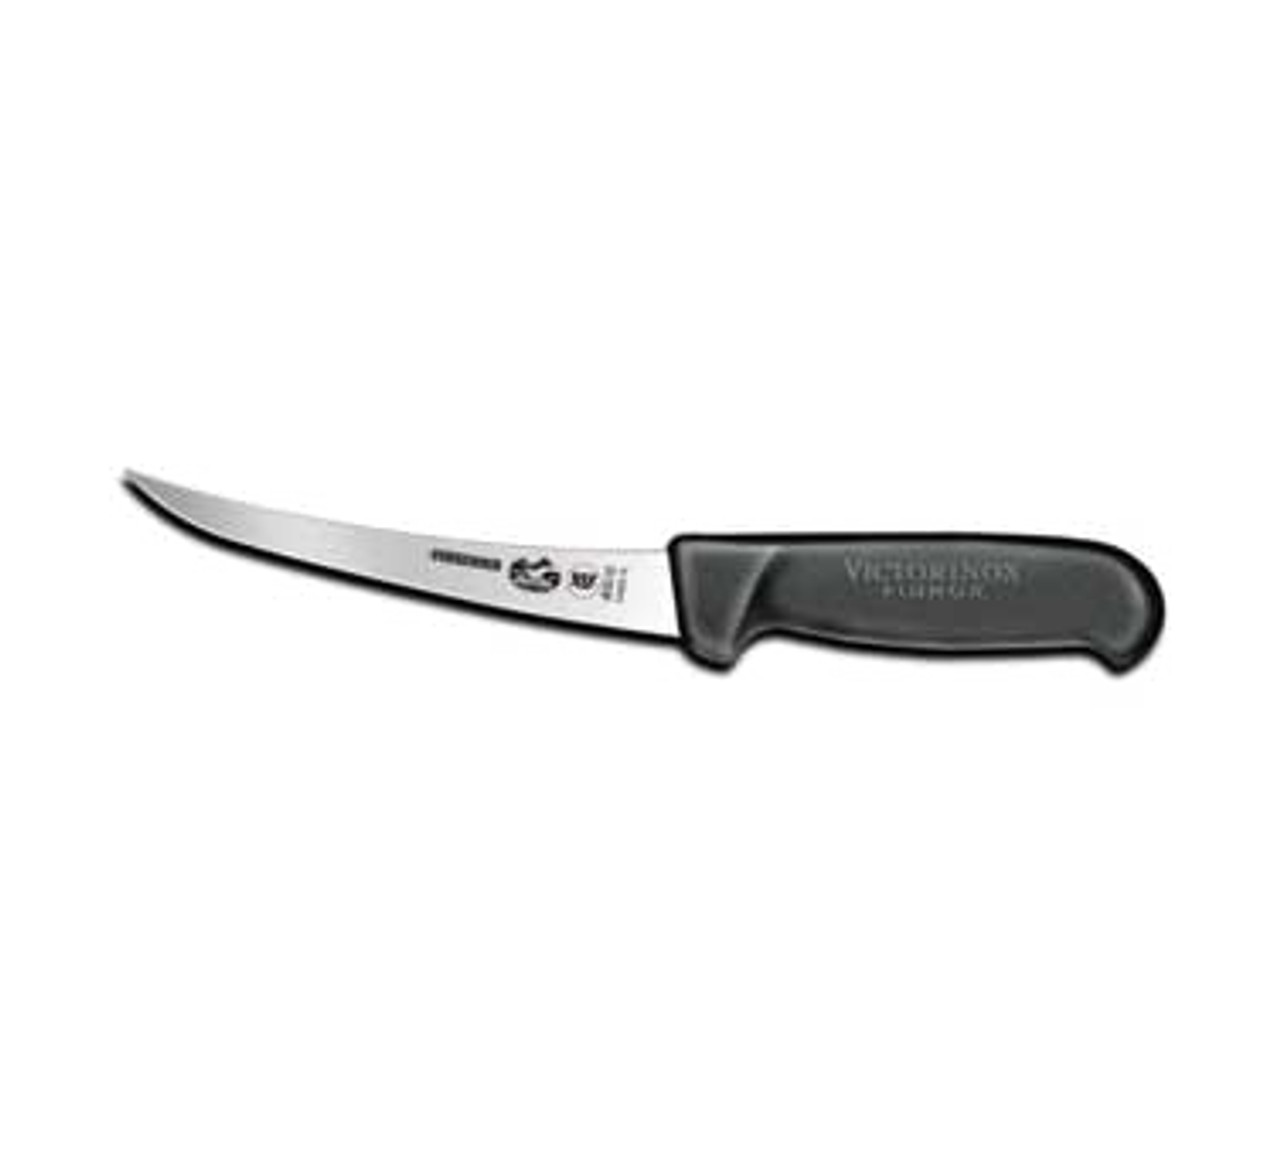 Victorinox 5.6603.15 6" Curved Boning Knife with Black Handle